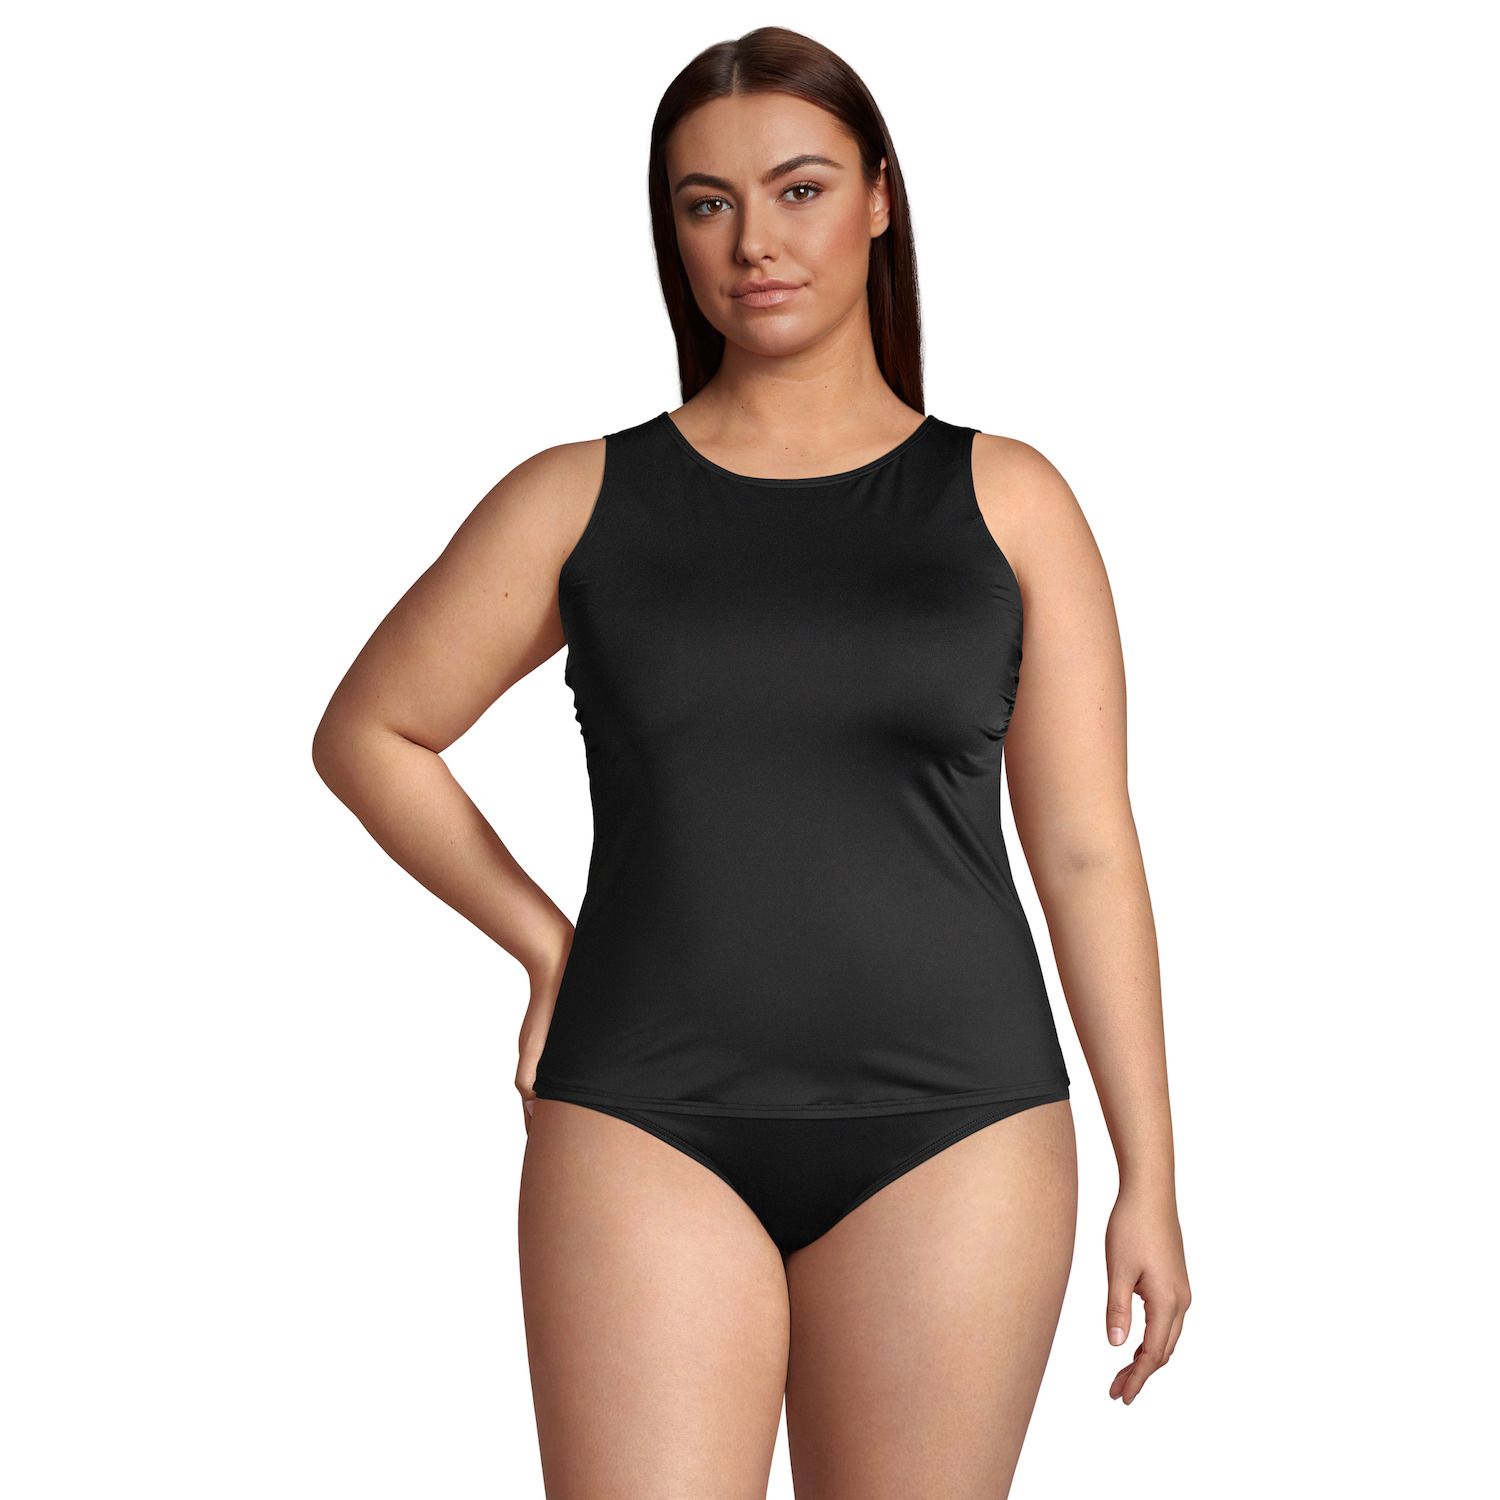 Image for Lands' End Plus Size DDD-Cup Chlorine Resistant UPF 50 Tankini Top at Kohl's.